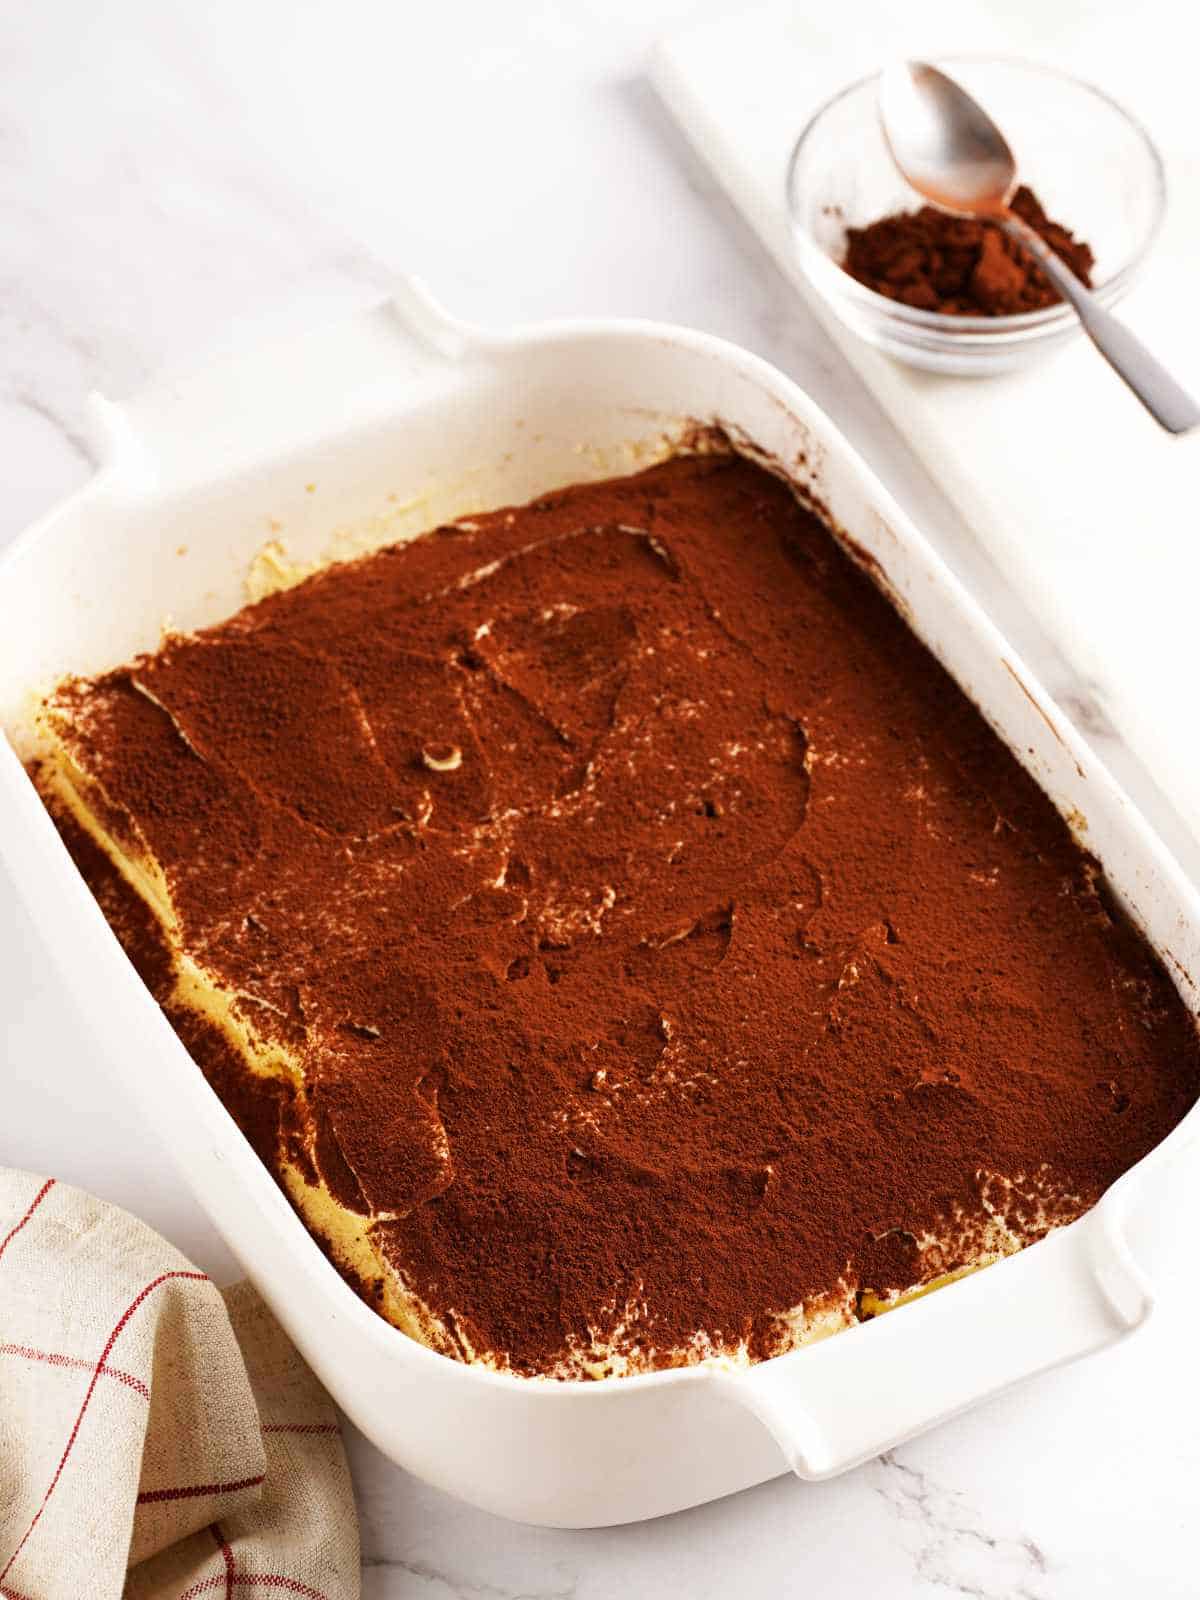 baking dish filled with cocoa powder dusted Italian dessert.